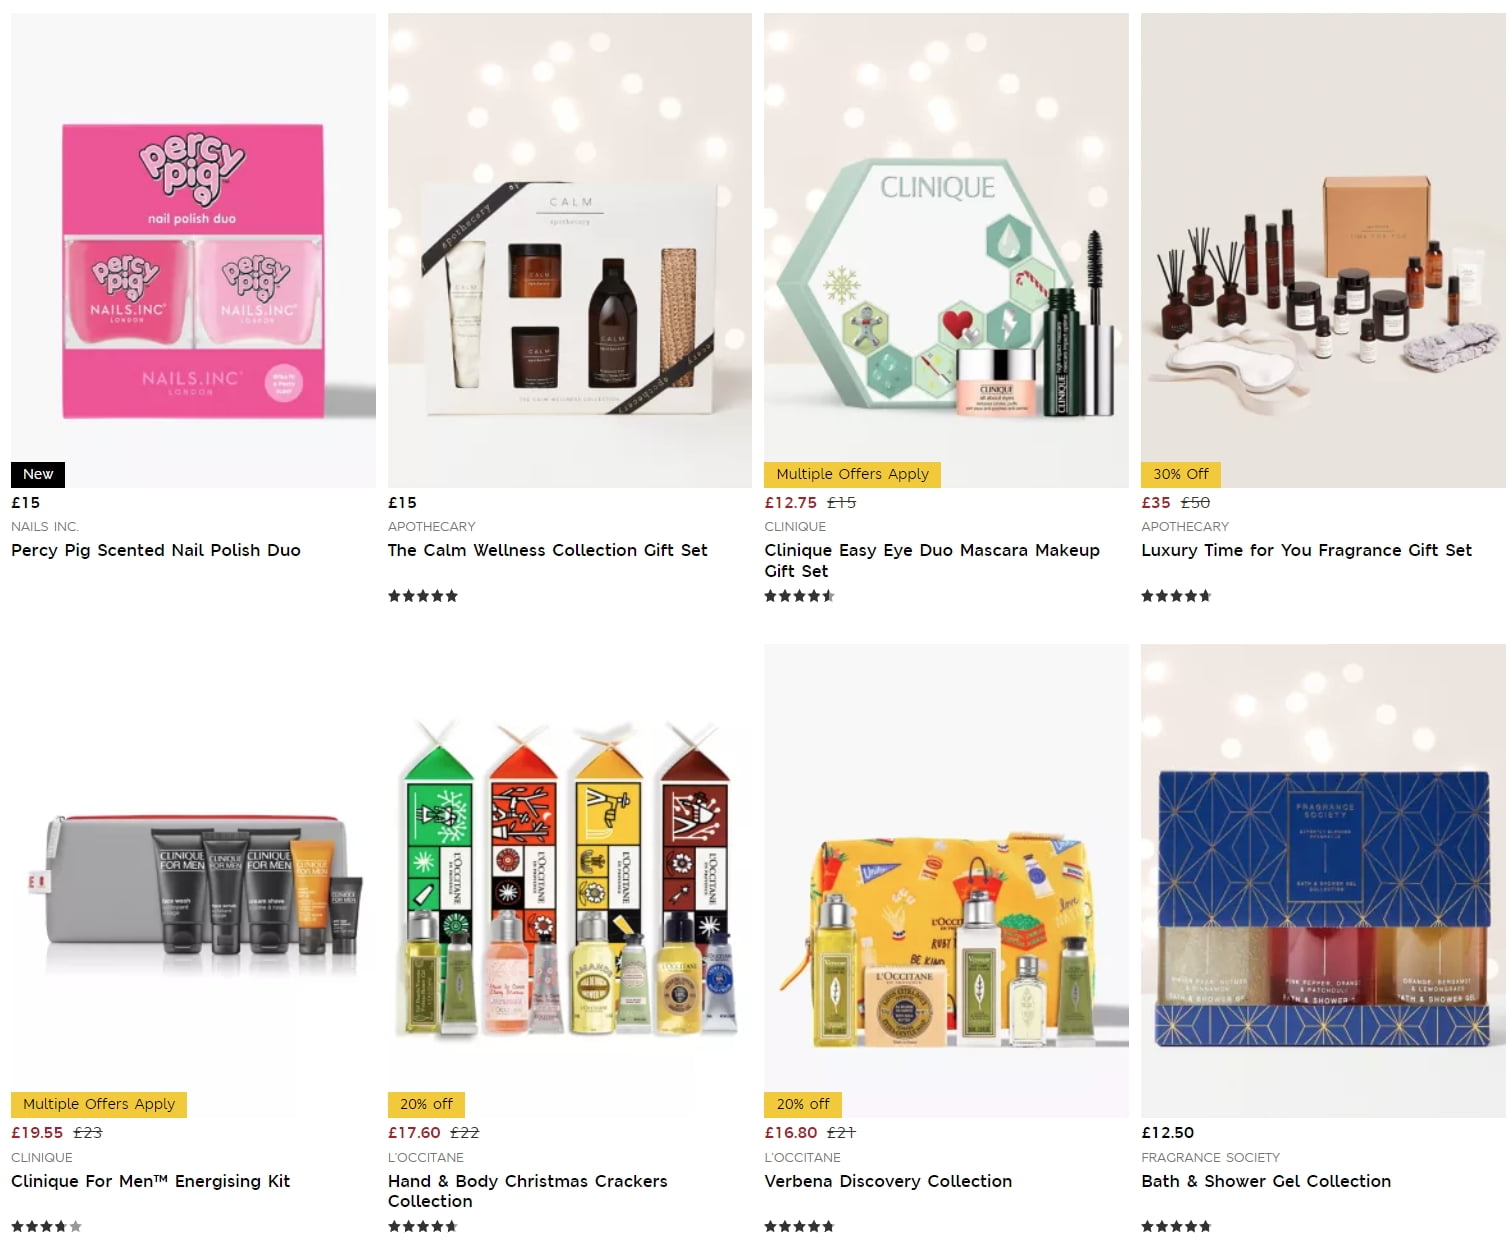 Up to 30% off selected Beauty Gifts at Marks & Spencer